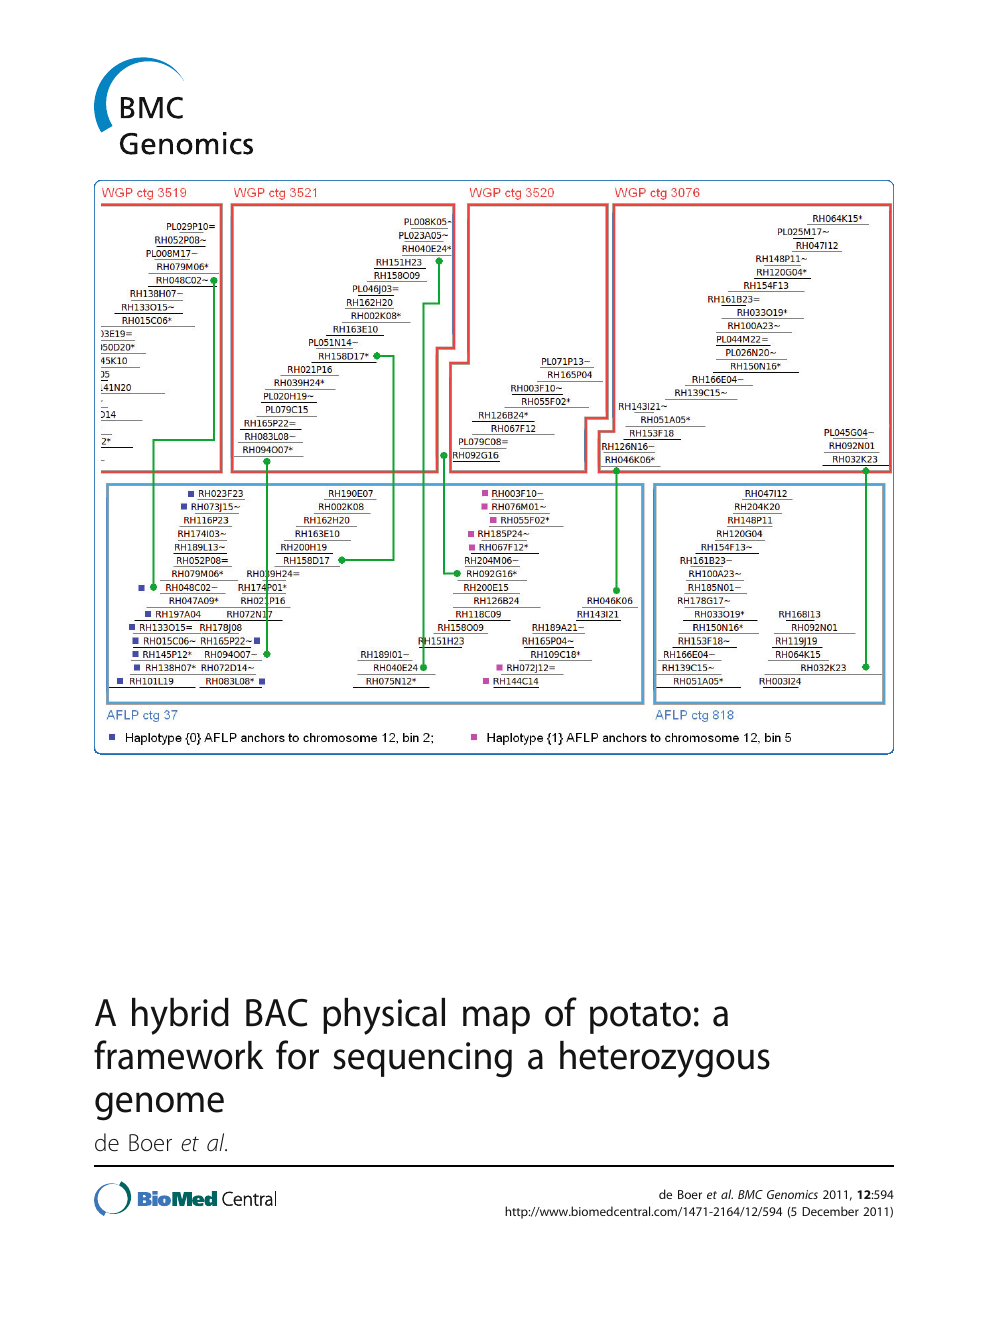 A hybrid BAC physical map of potato a framework for sequencing a heterozygous genome image